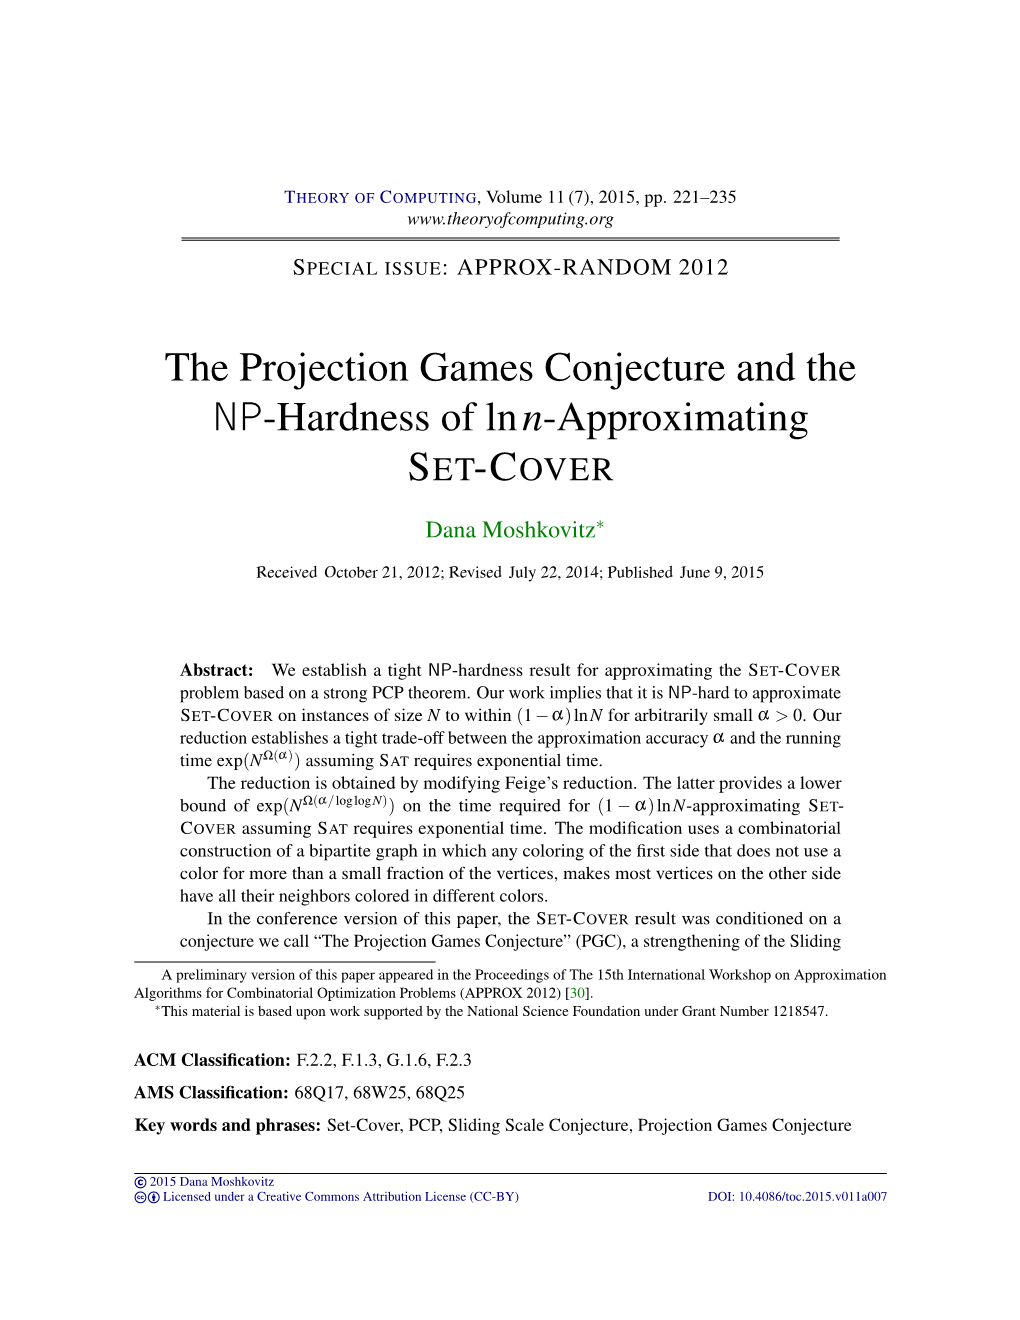 The Projection Games Conjecture and the NP-Hardness of Ln N